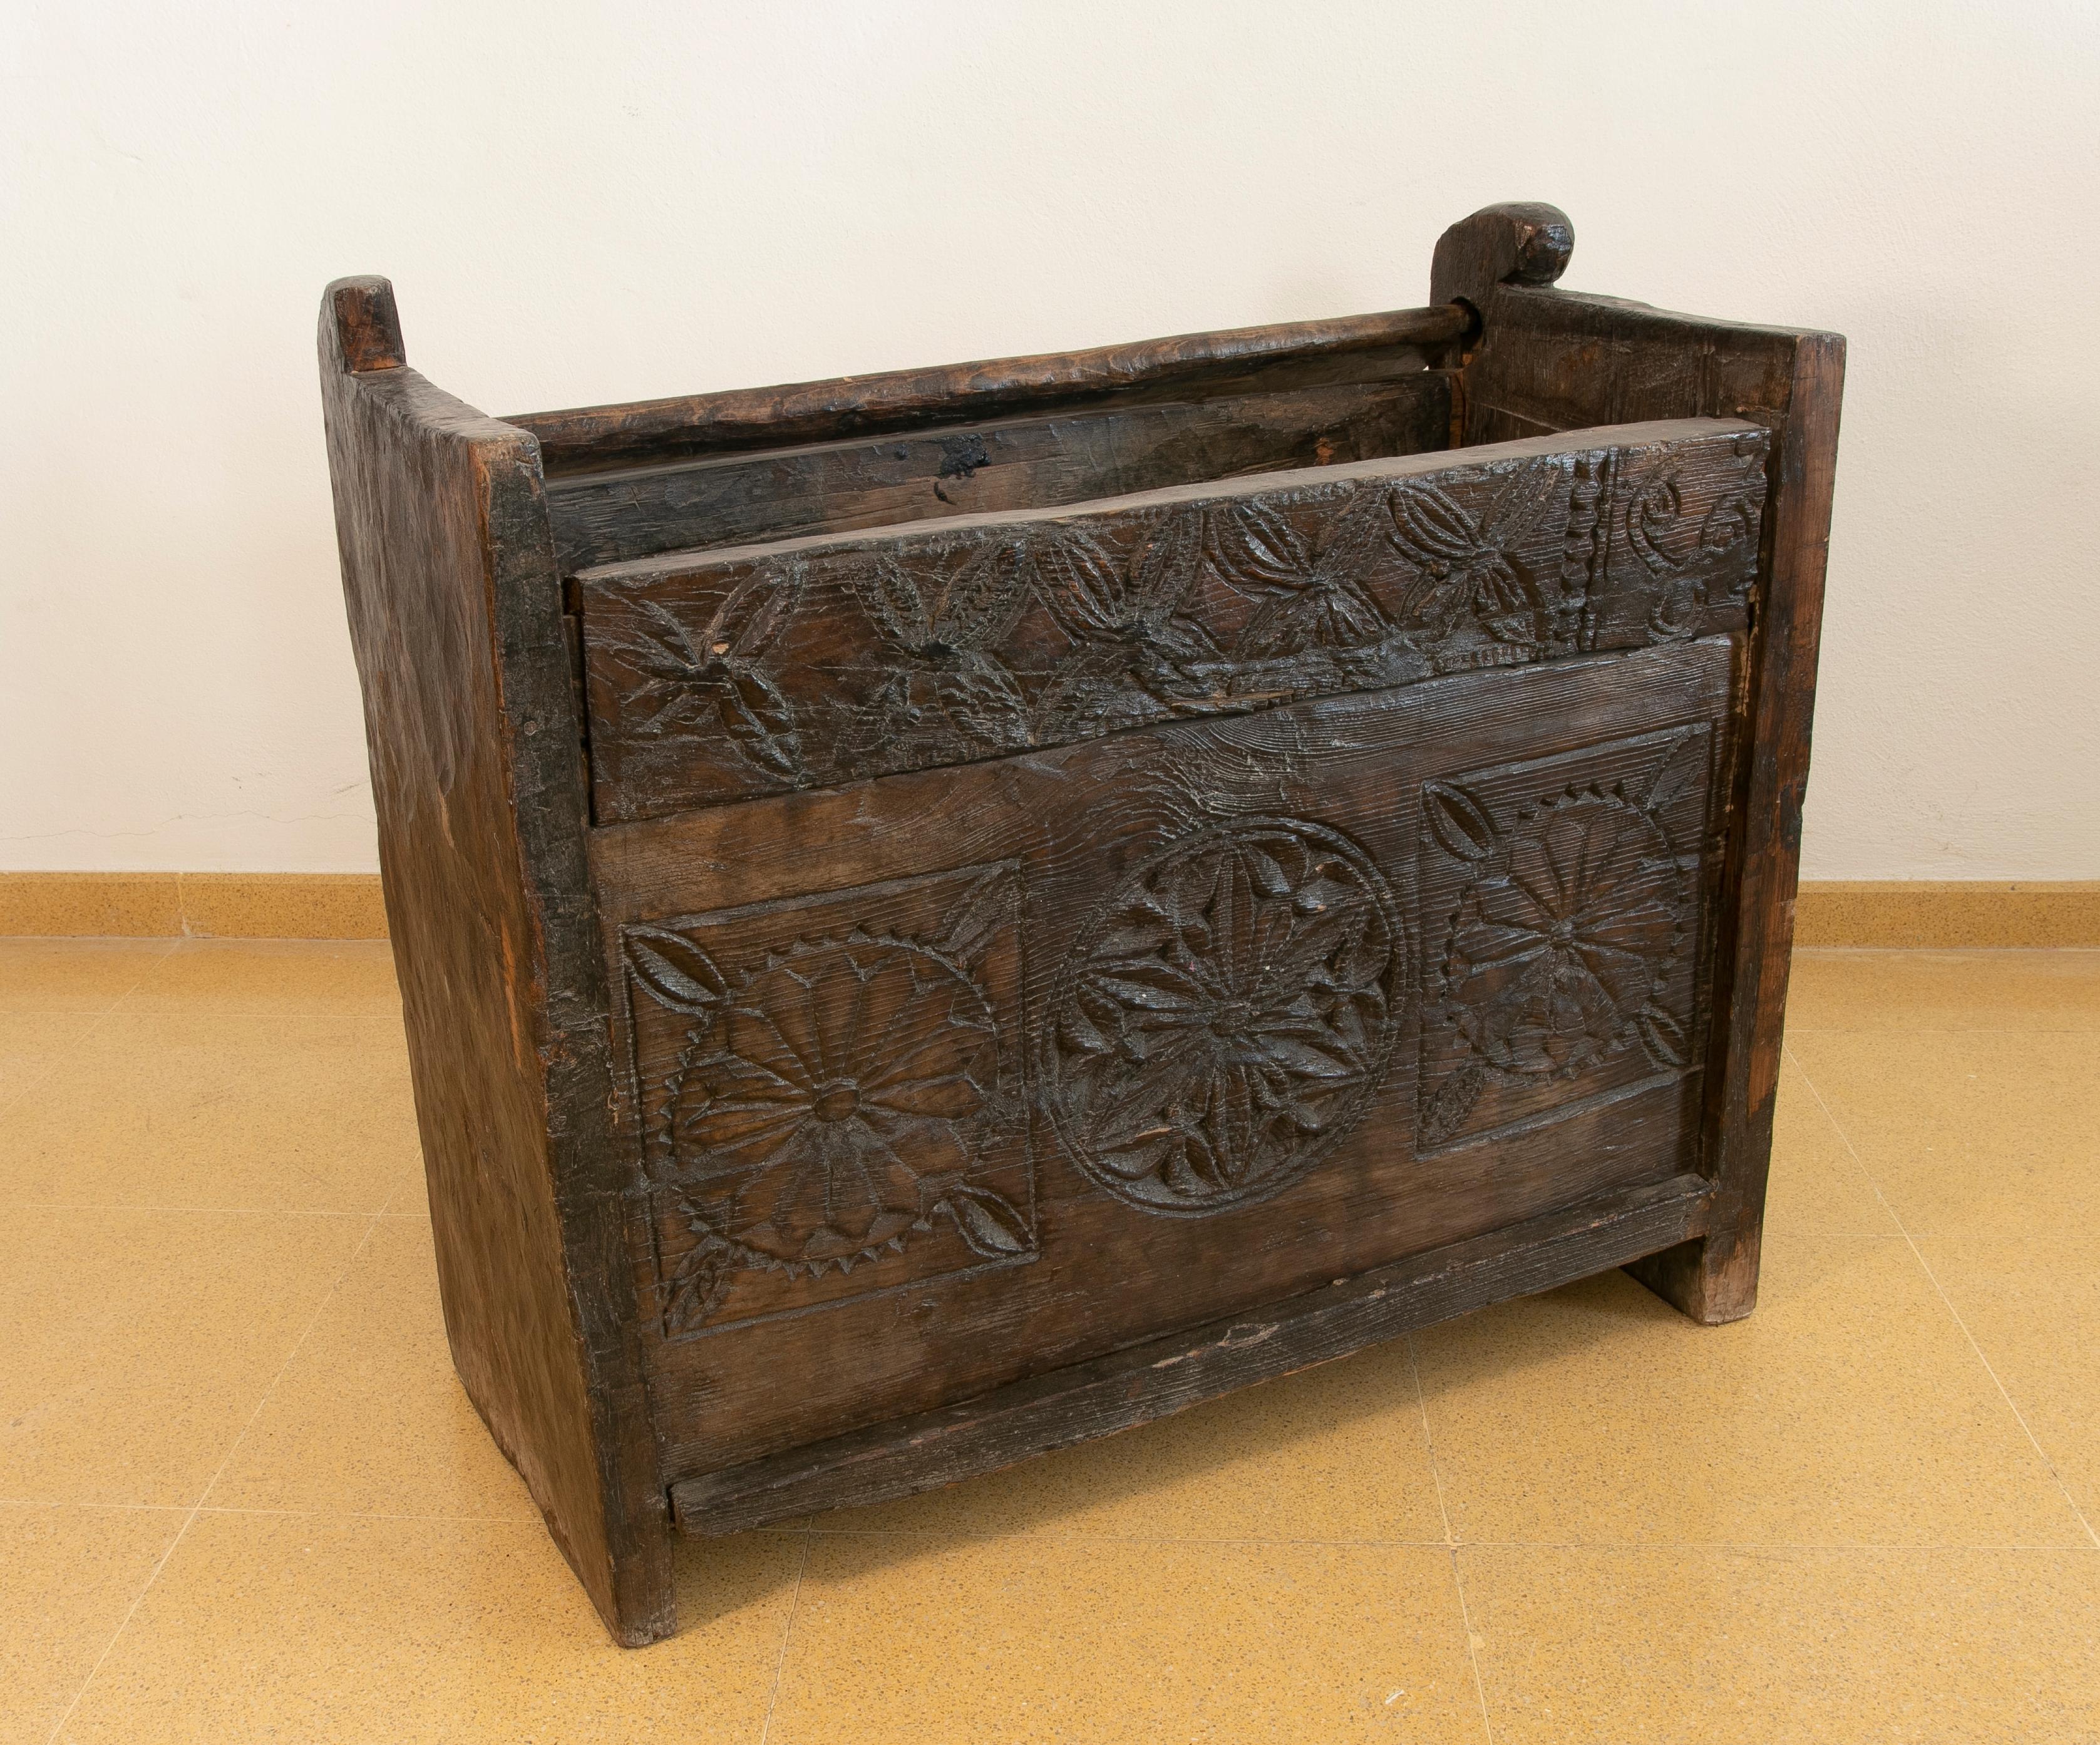 Colonial hand-carved wooden box with lid on top.